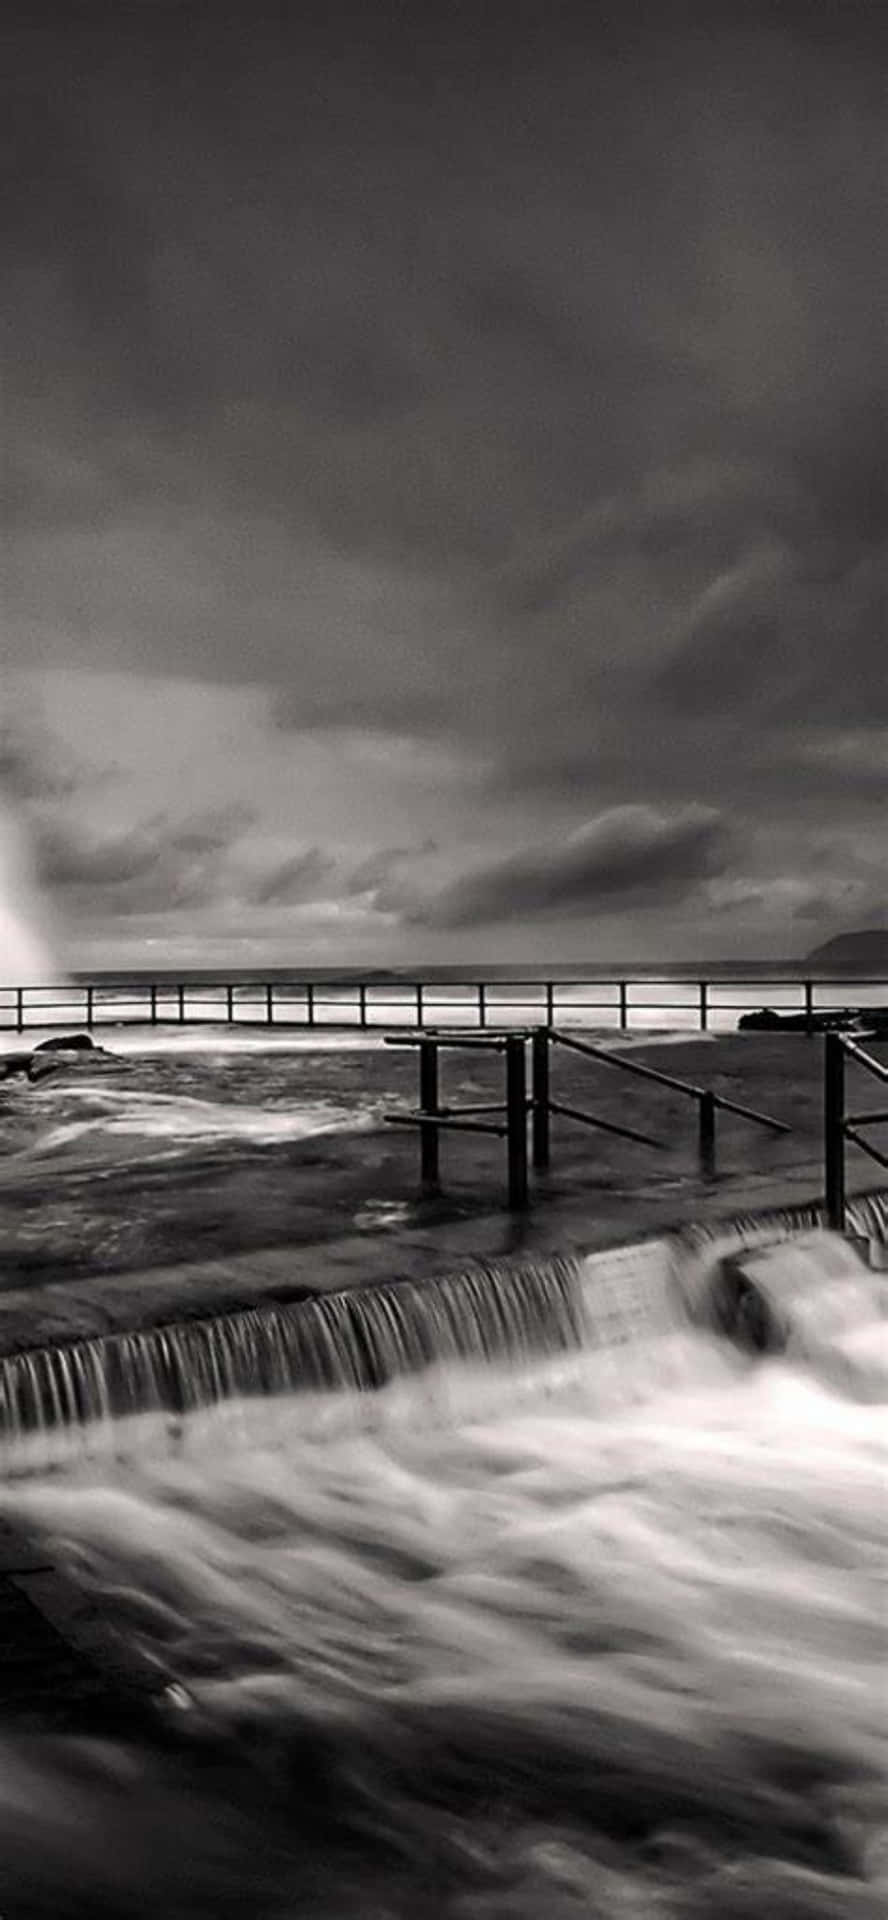 A Black And White Photo Of A Pier With Waves